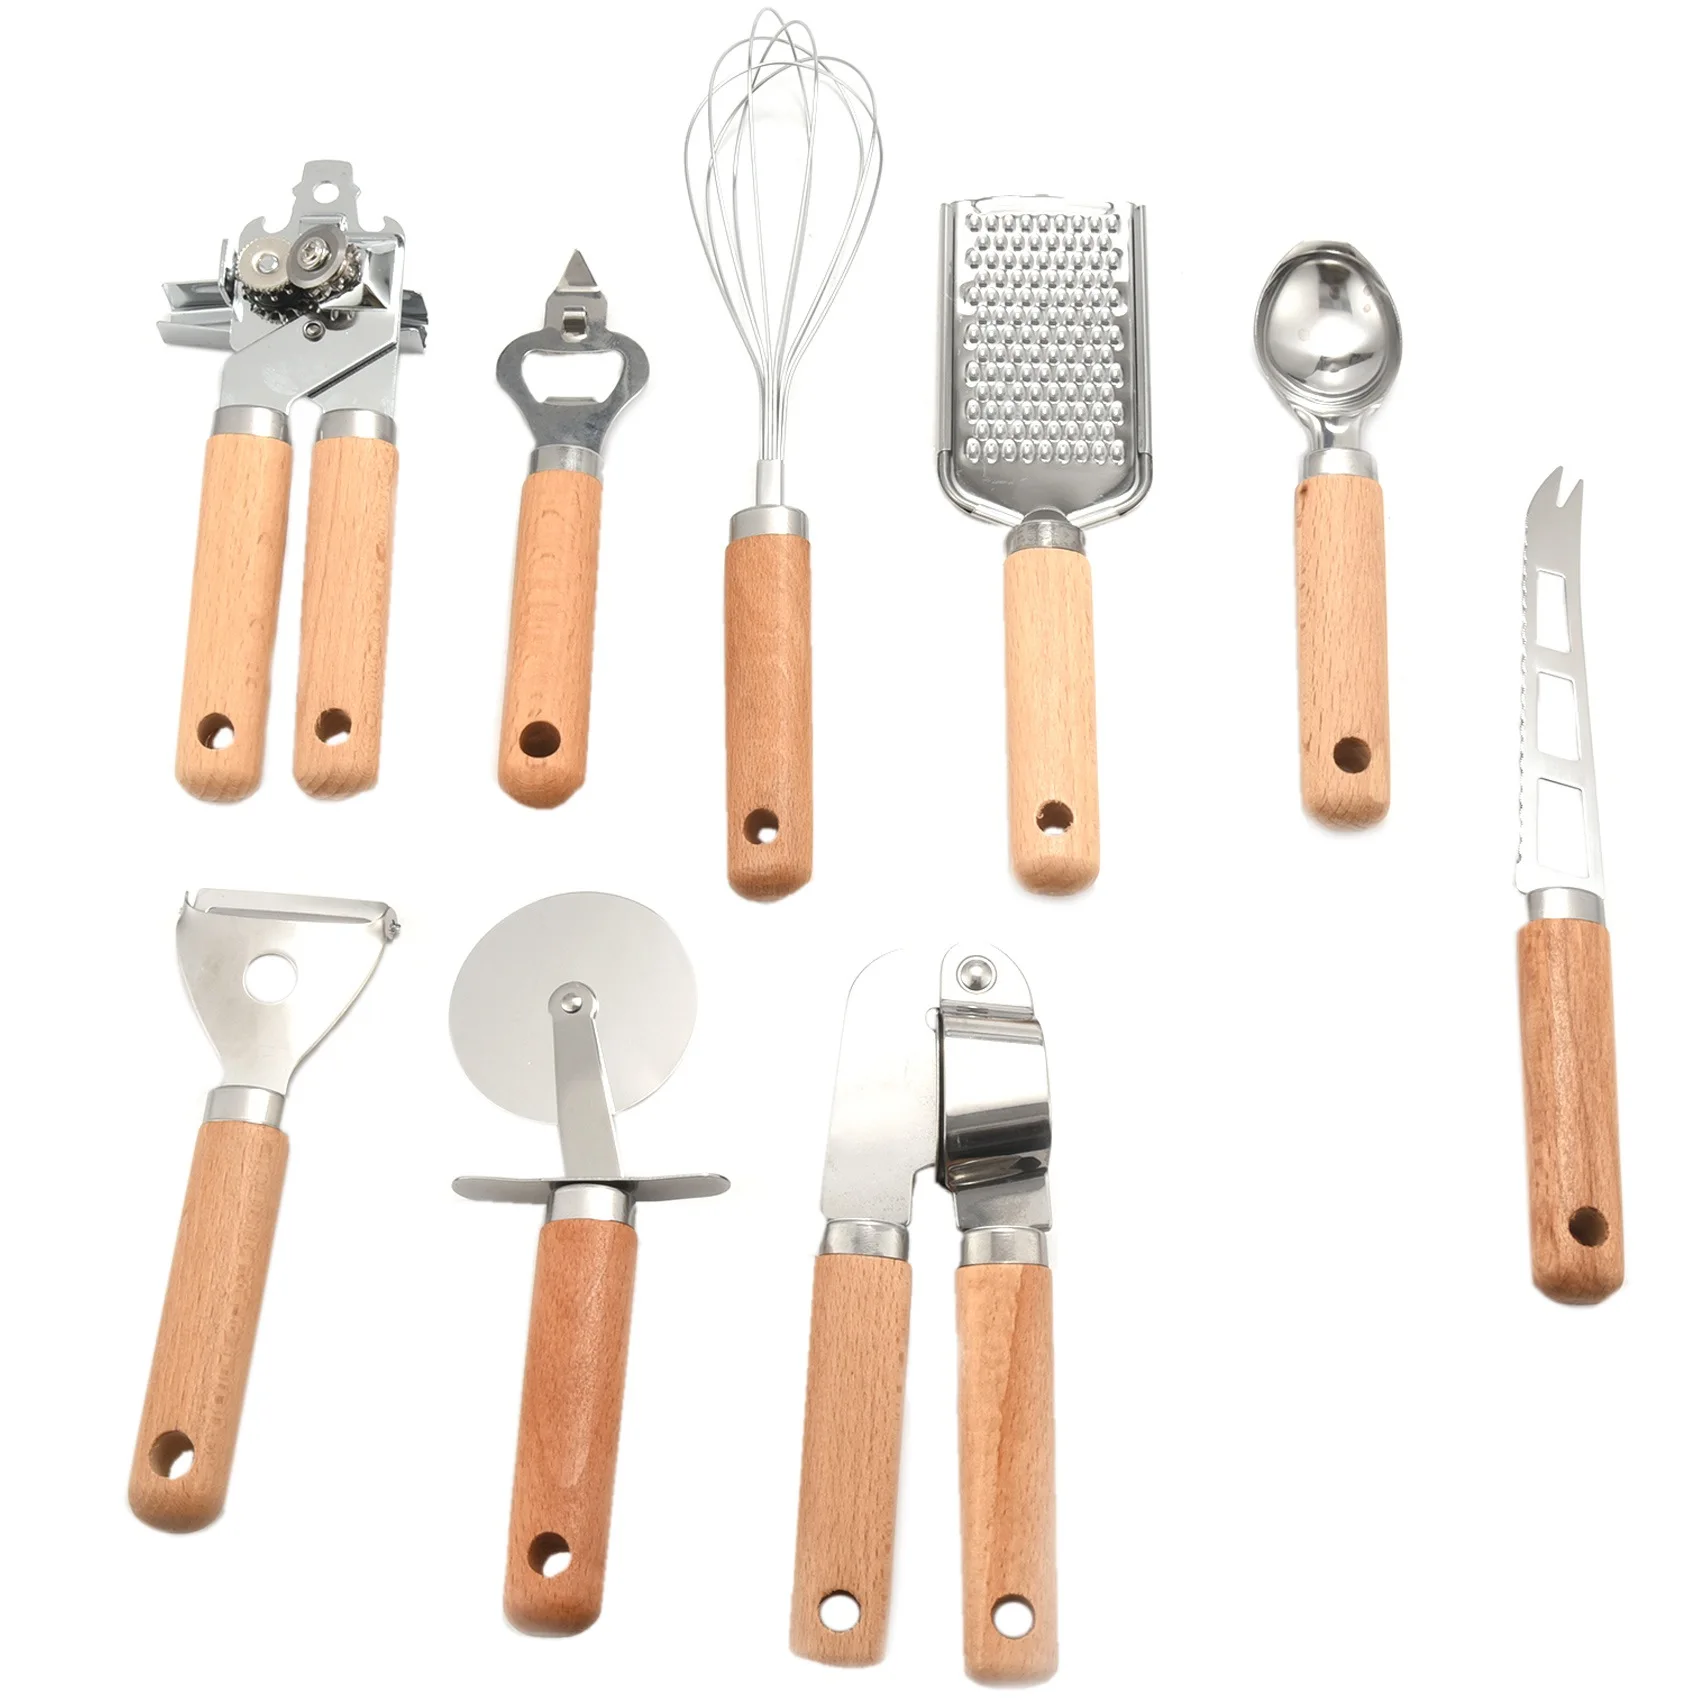 

Kitchen Cooking Utensils Set,Stainless Steel Gadget Tool with Wooden Handle,Whisk/Peeler/Cutter/Can Opener/Corkscrew